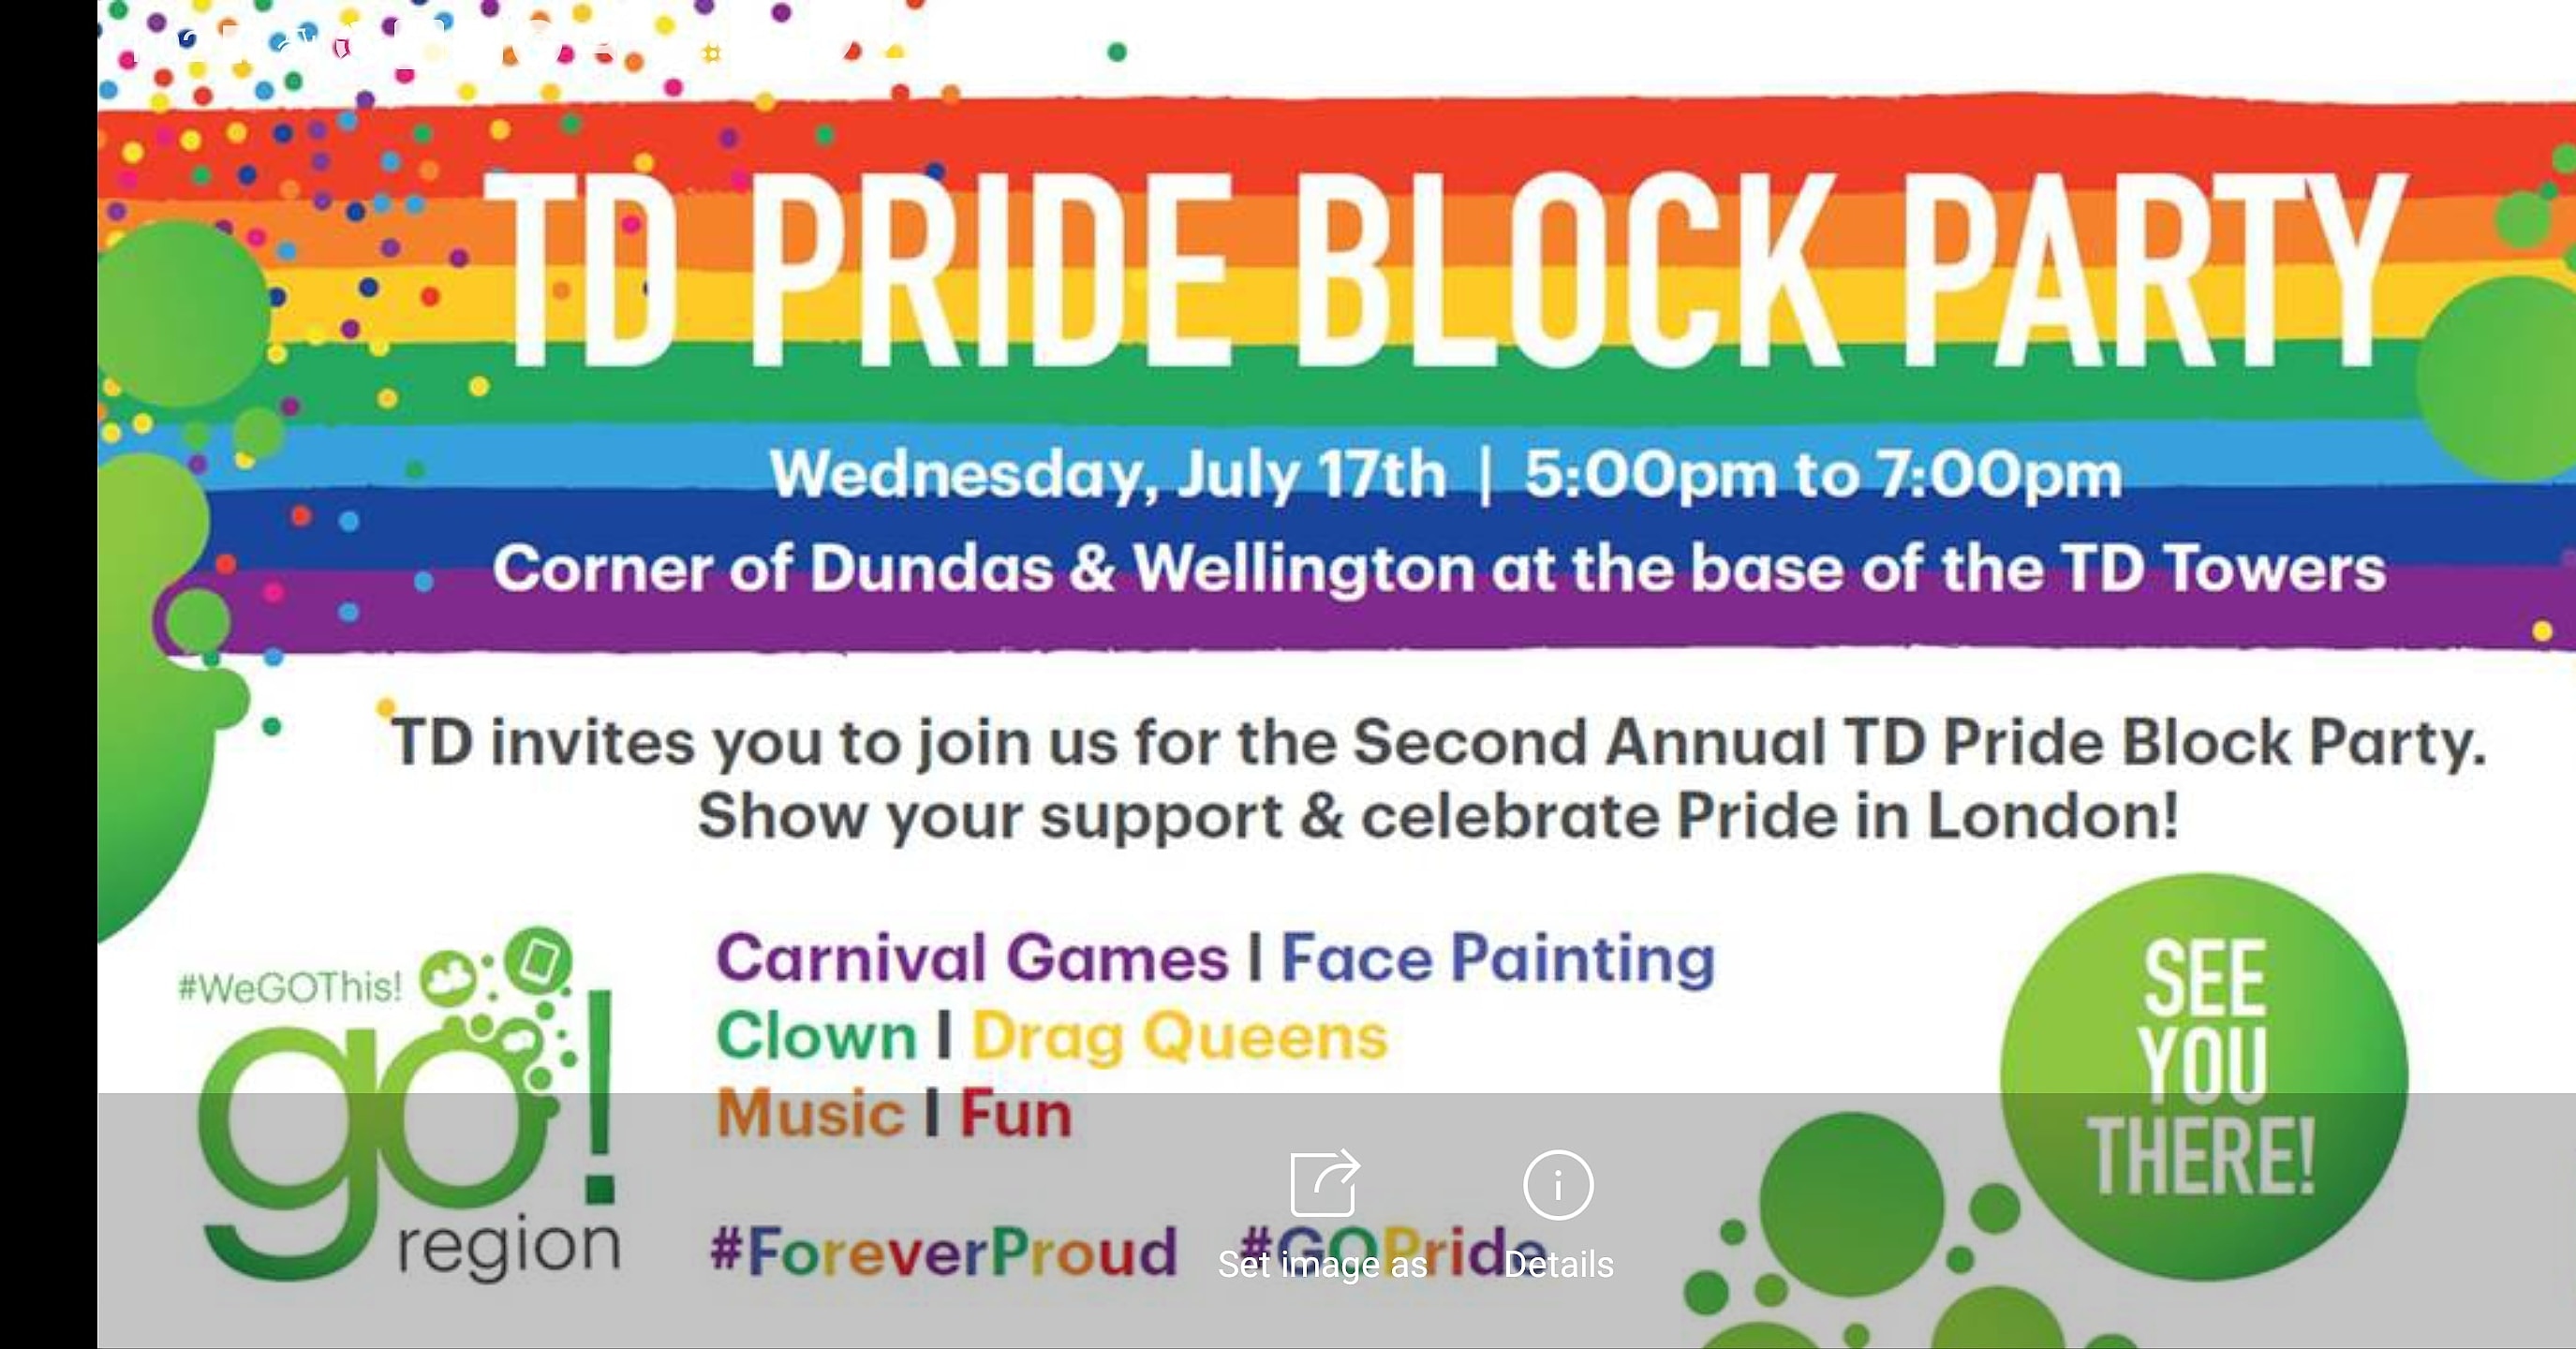 QueerEvents.ca - London event listing - TD Pride Block Party - event banner